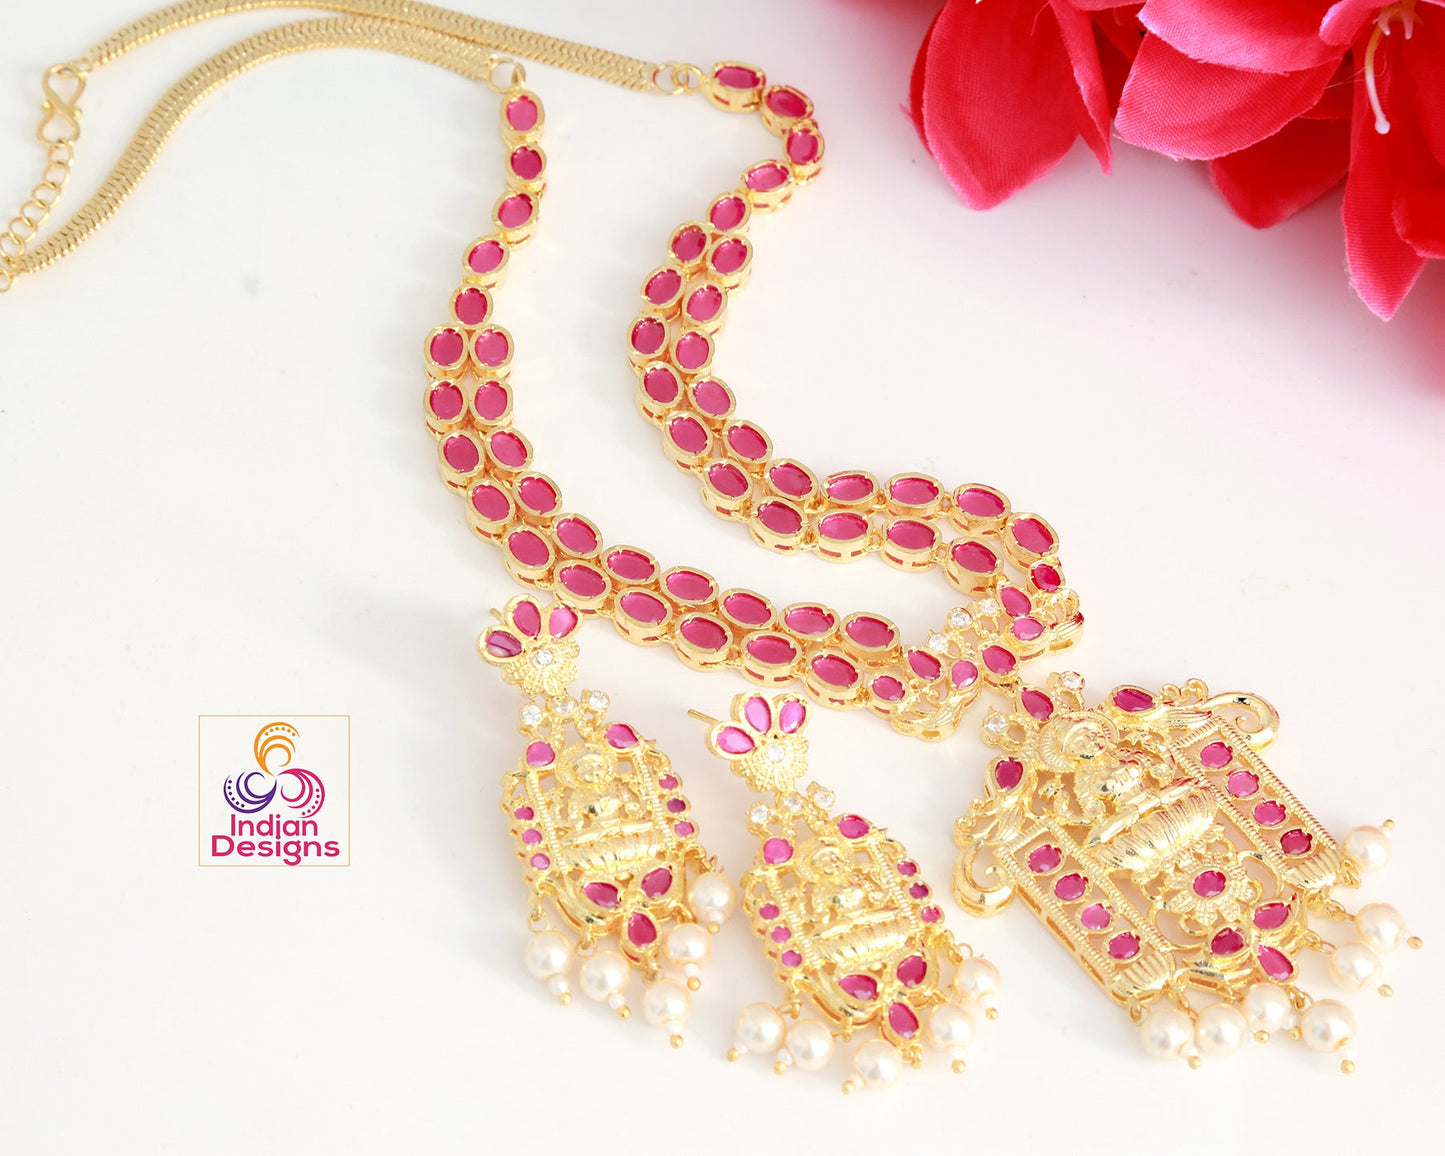 Lakshmi devi necklace designs | Gold necklace designs with ruby and emerald stones with Lakshmi Pendant |Indian Temple jewelry Necklace